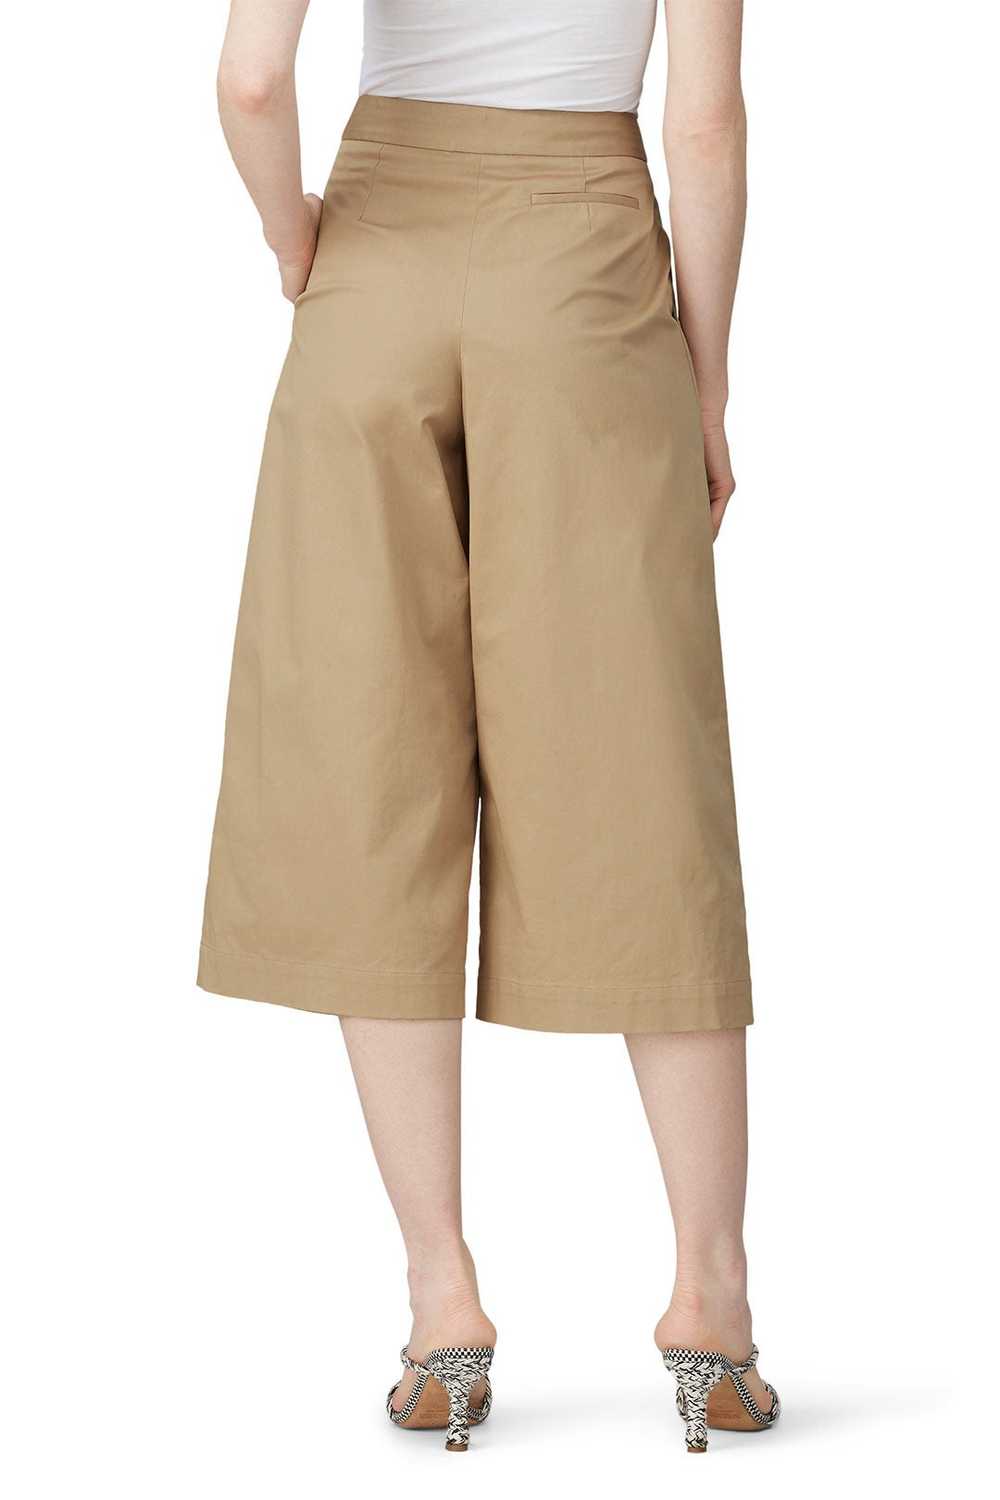 Monse Pleated Front Culottes - image 3